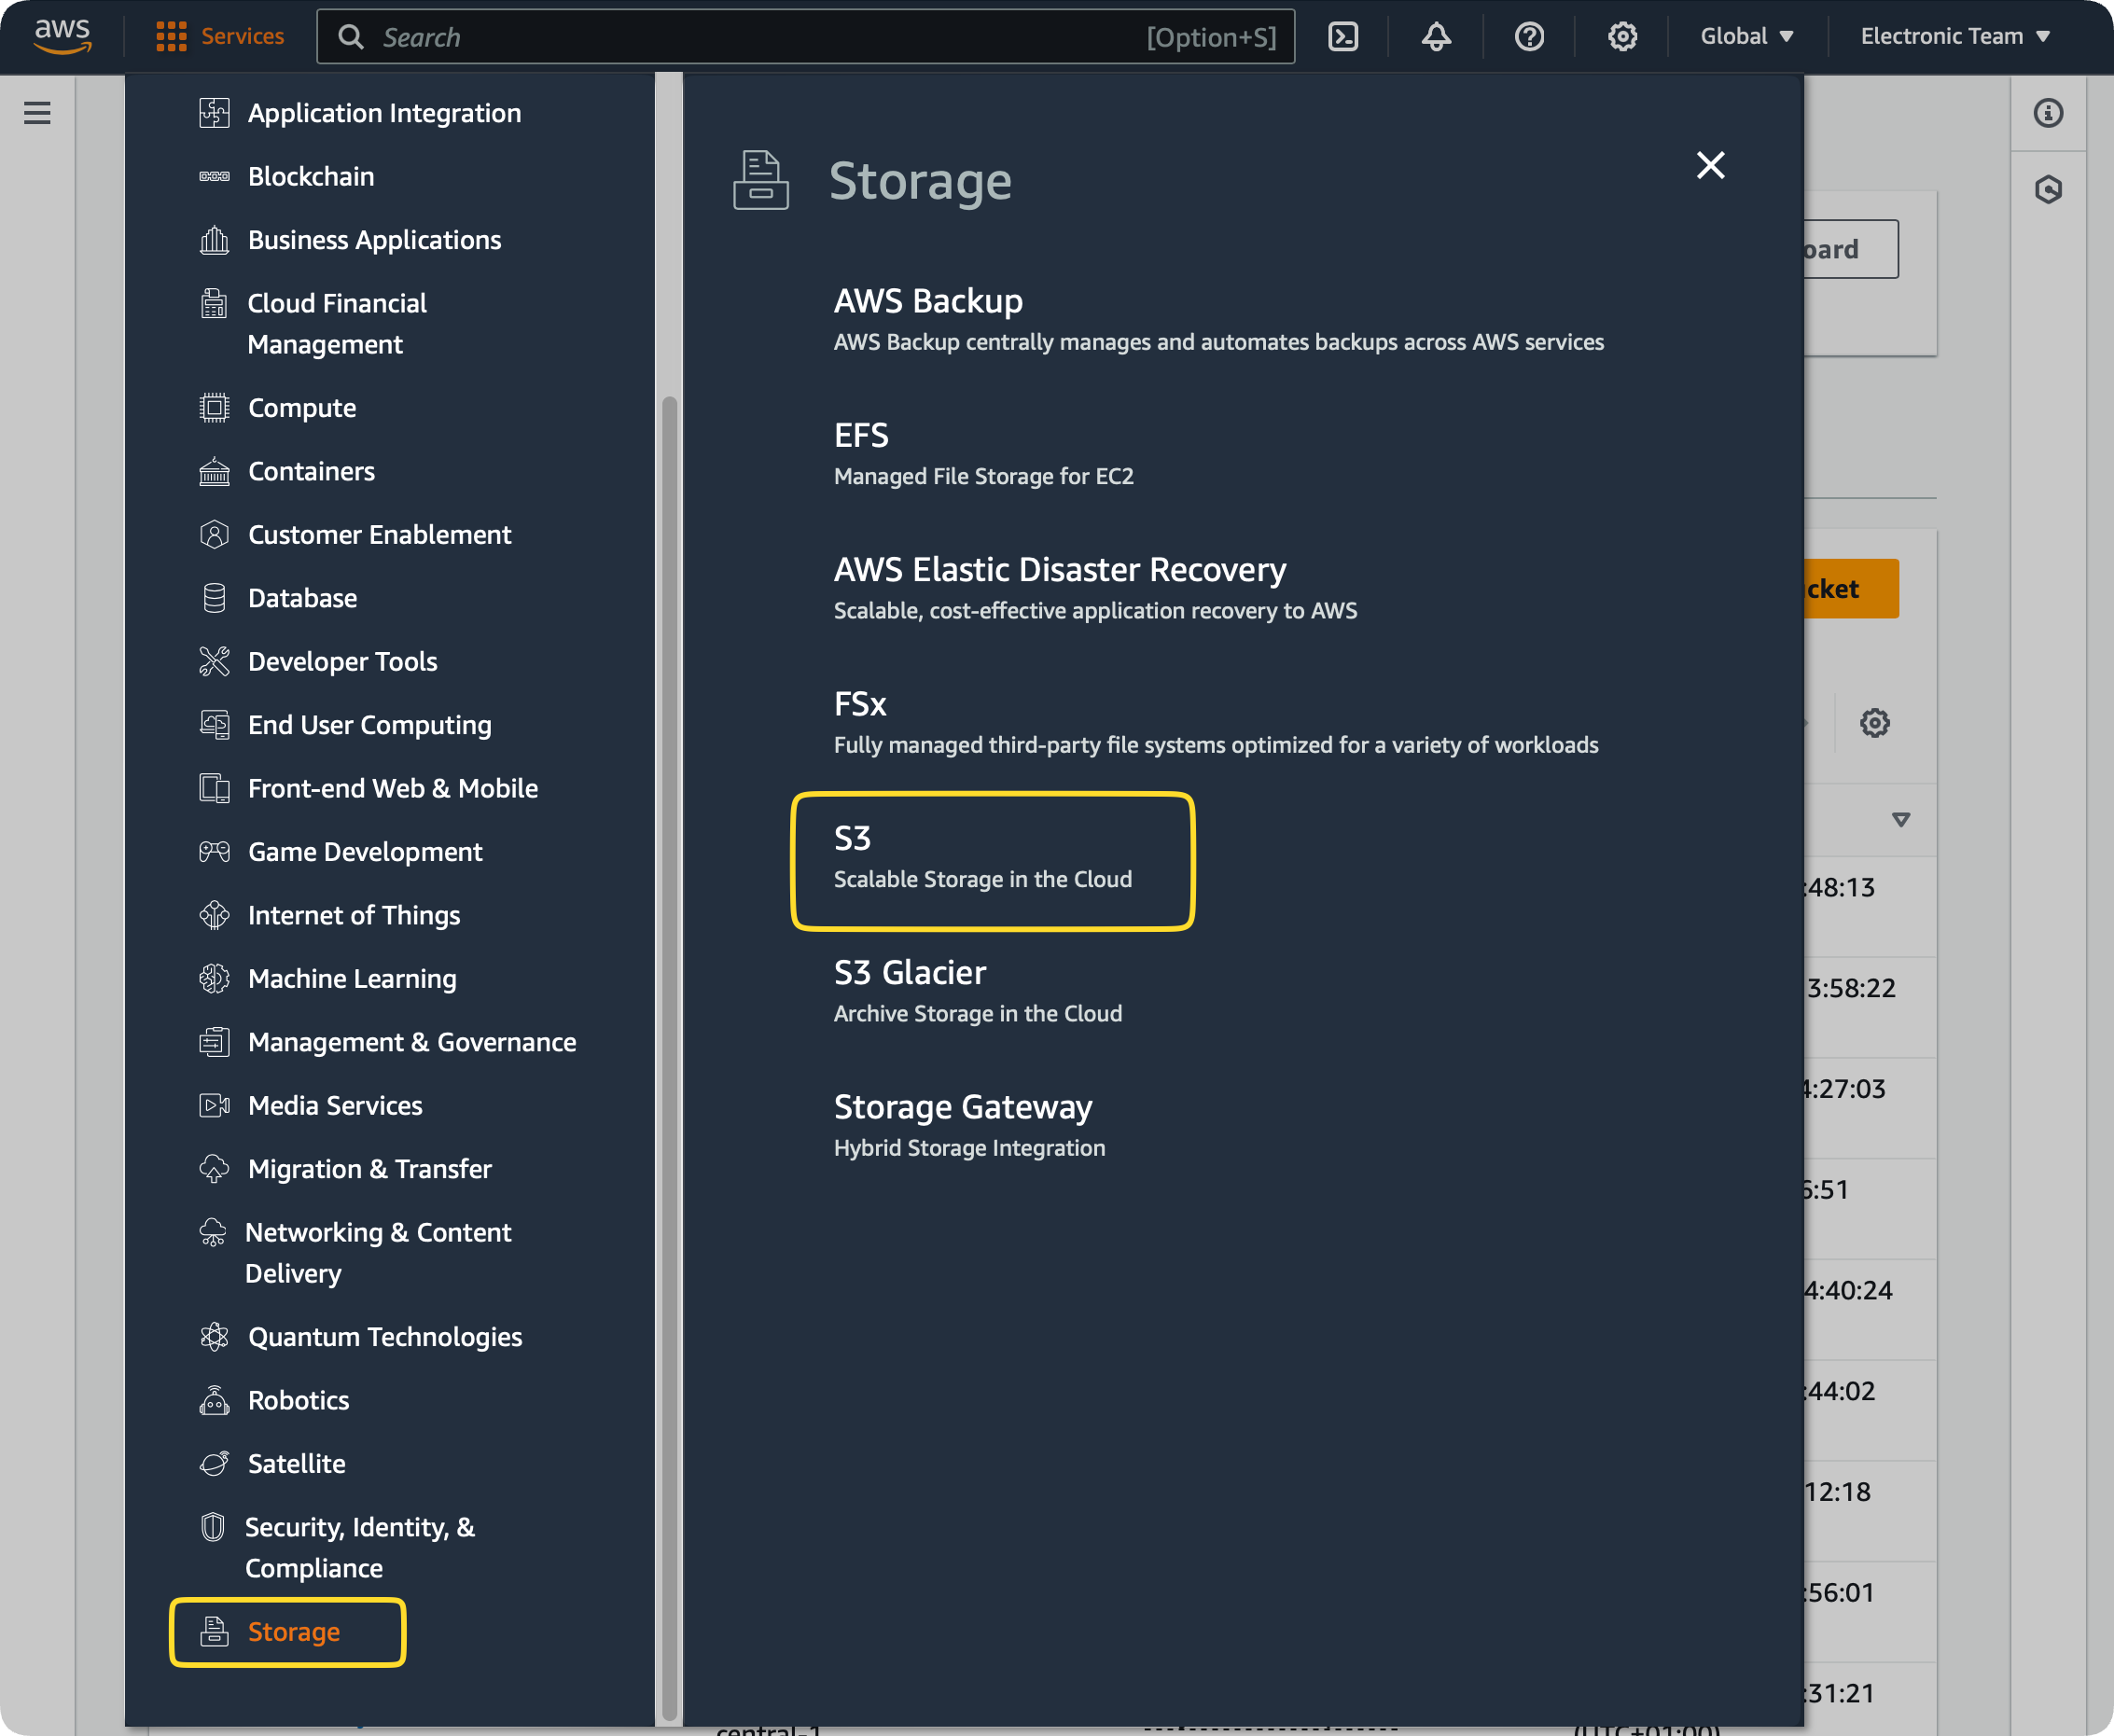 Storage Section of the Cloud Object Storage - Amazon S3 - AWS is highlghted